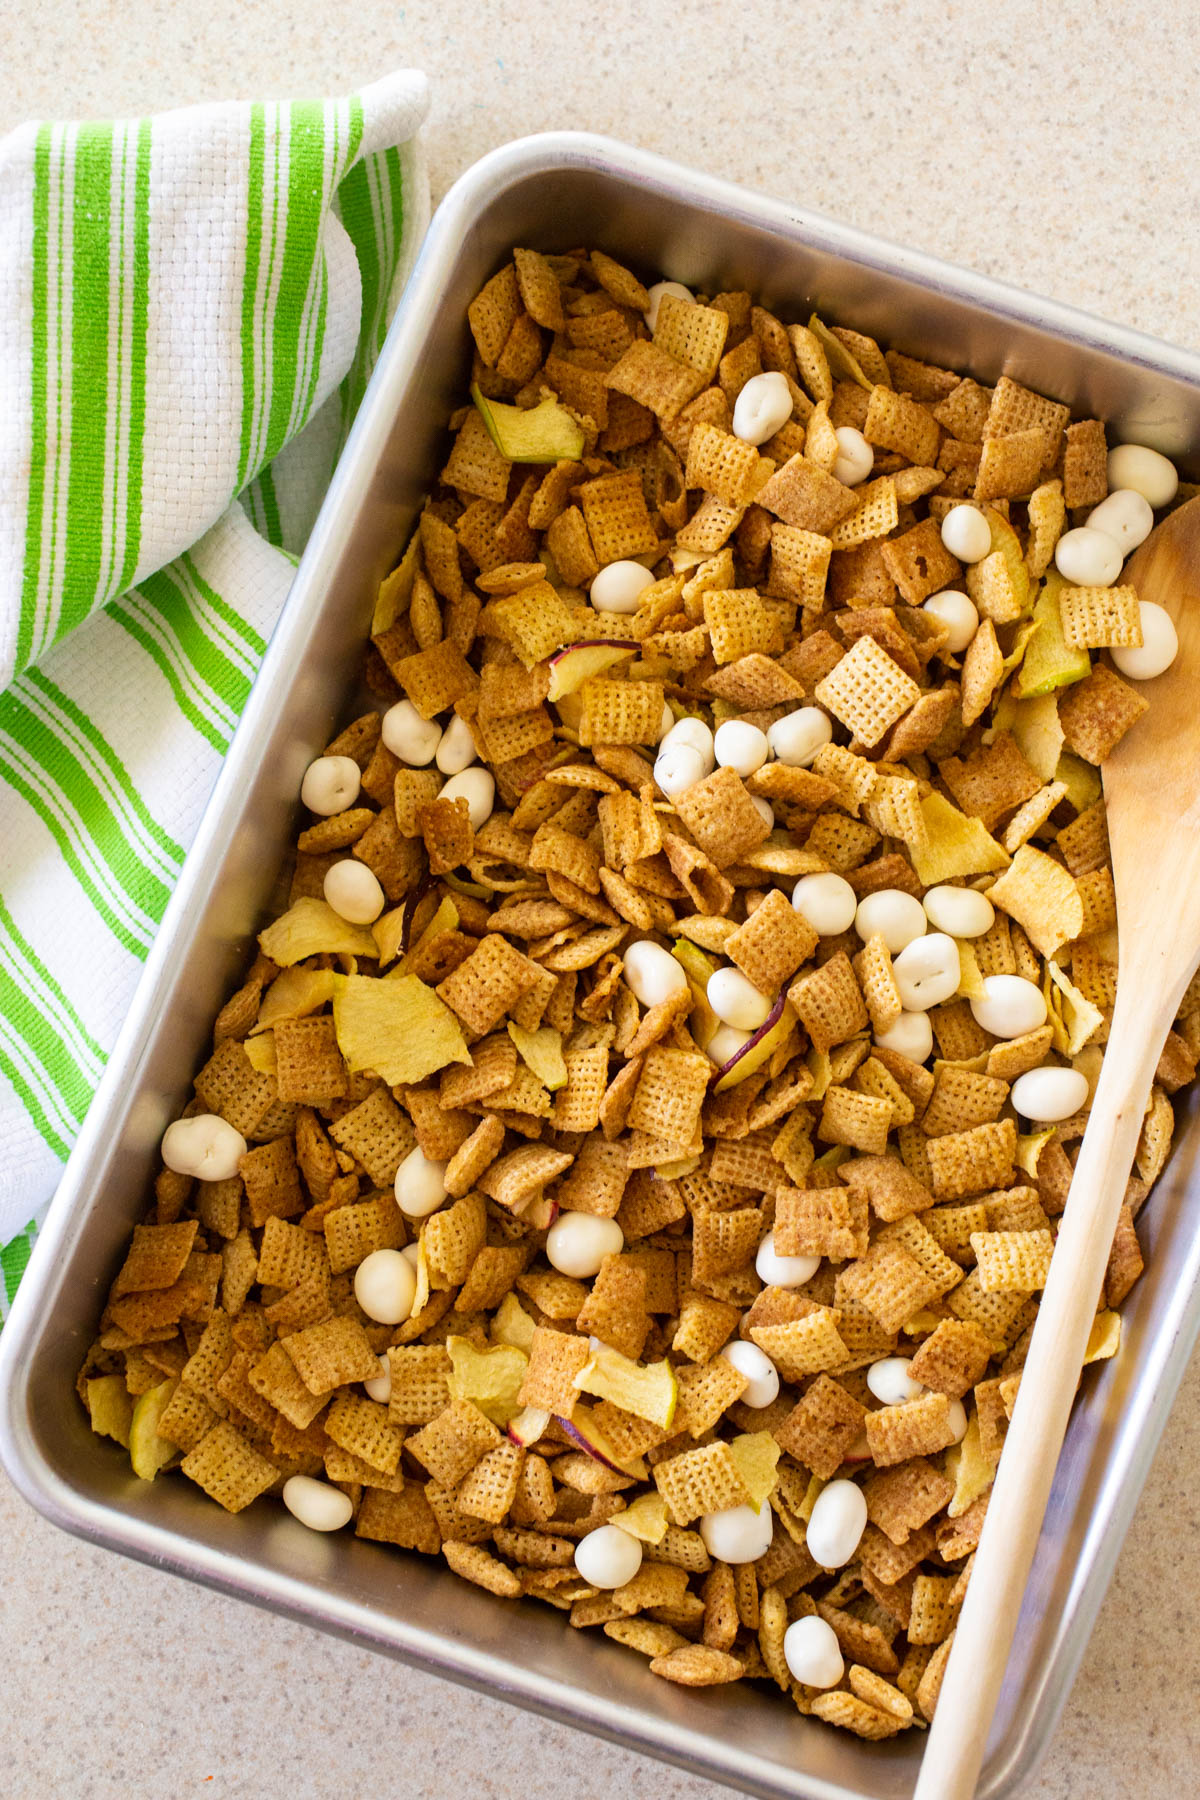 The finished snack mix is in a 9x13-inch metal pan with a spoon.